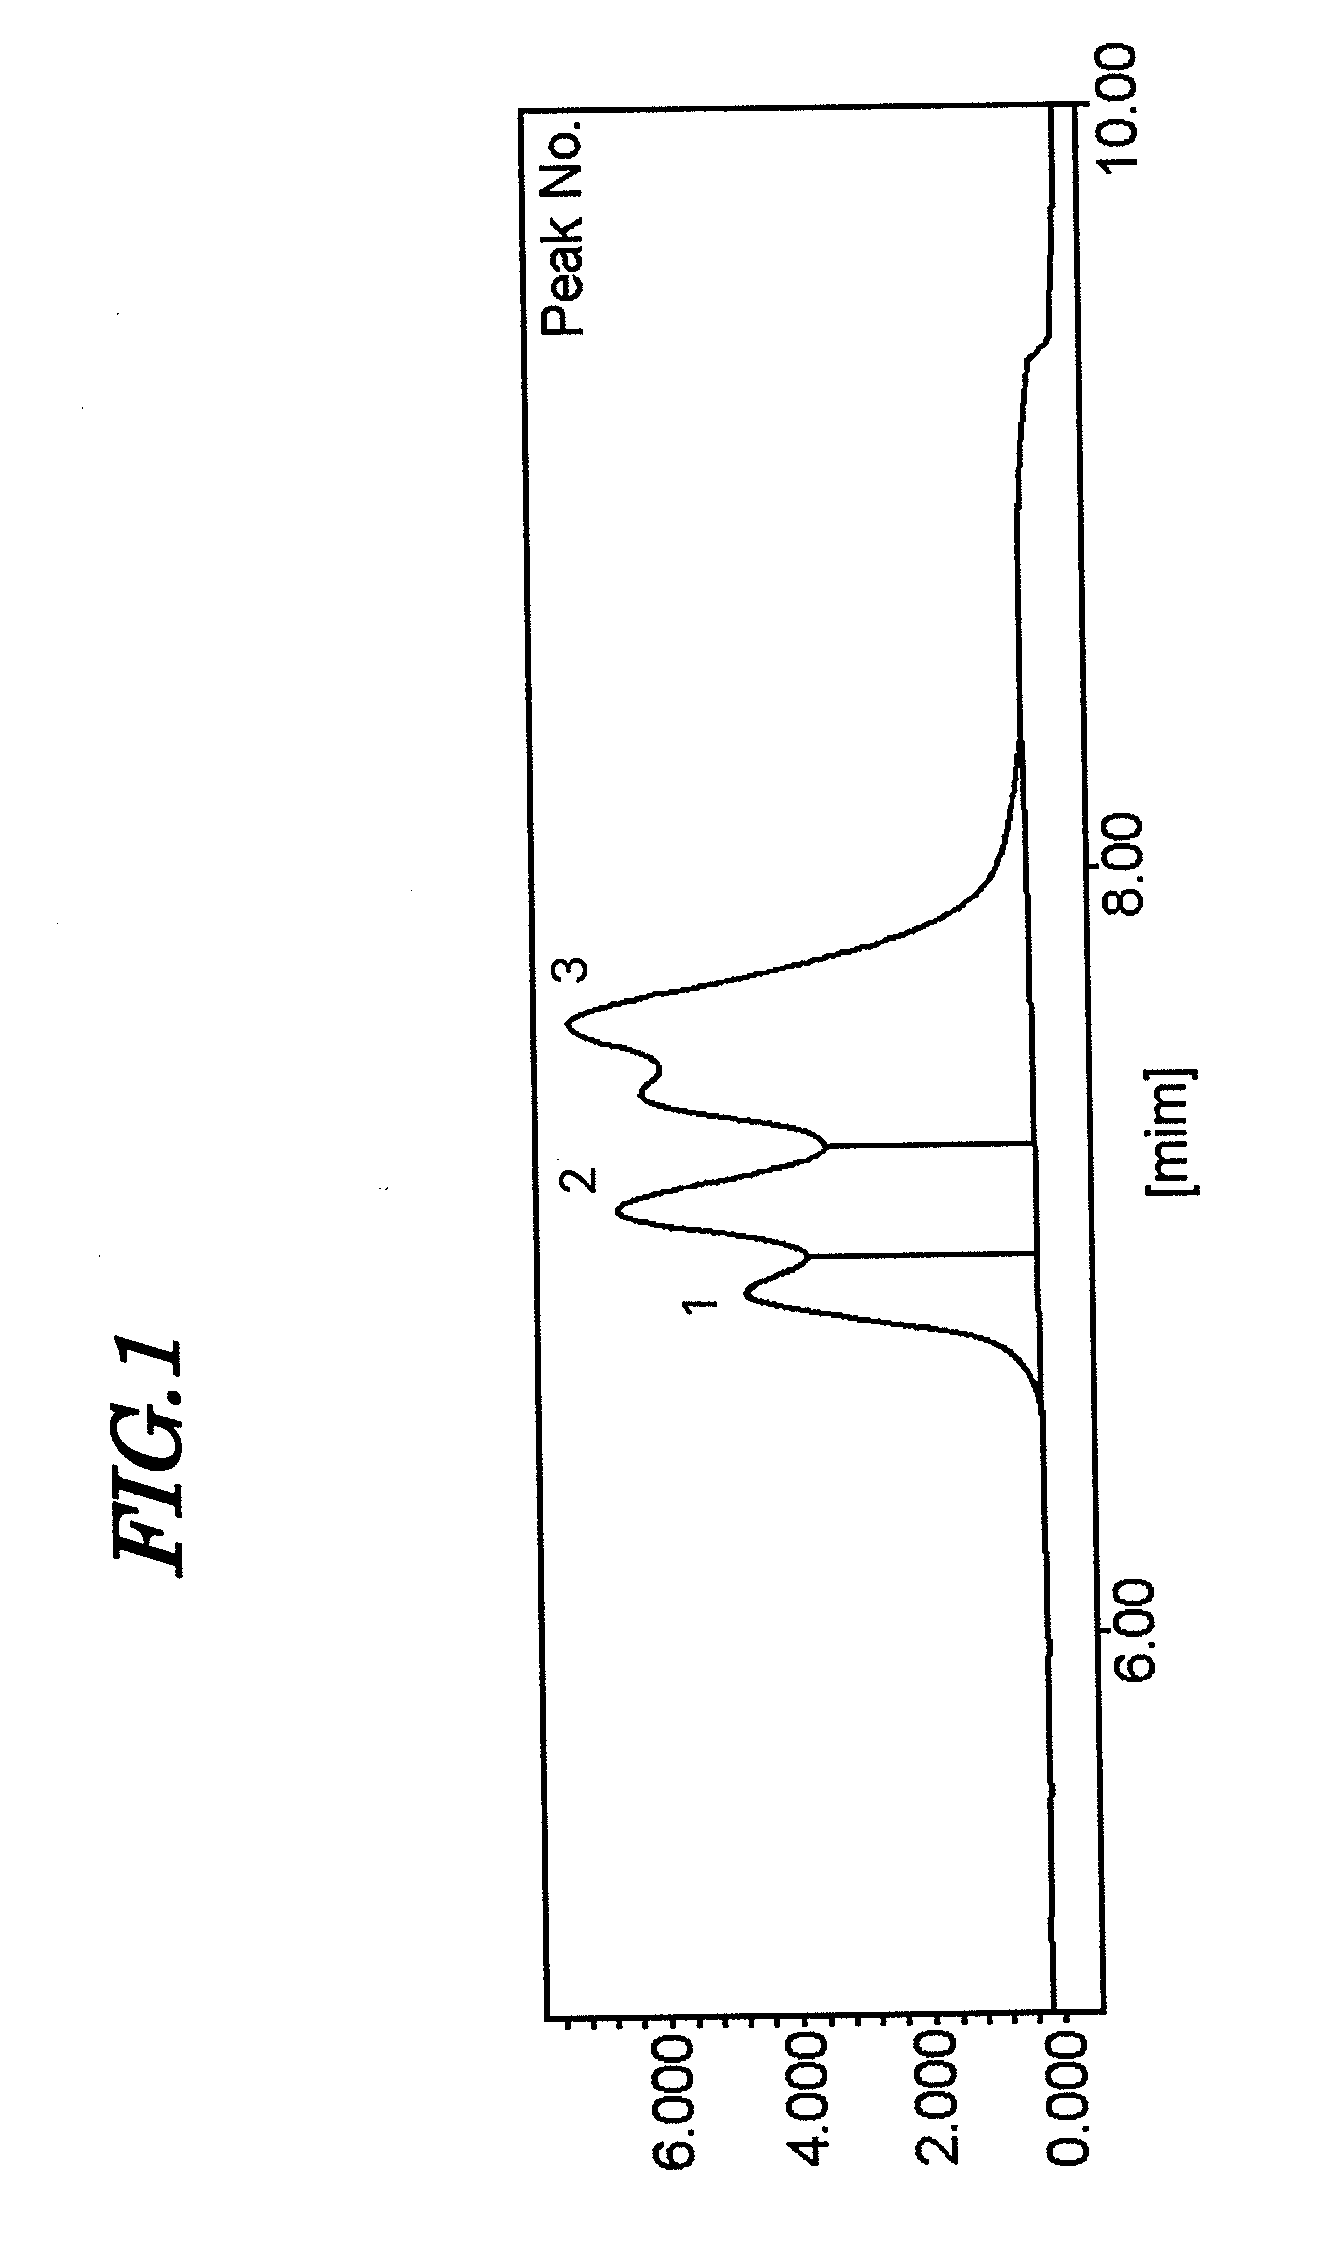 Conjugated diene polymer, method for producing conjugated diene polymer, and conjugated diene polymer composition